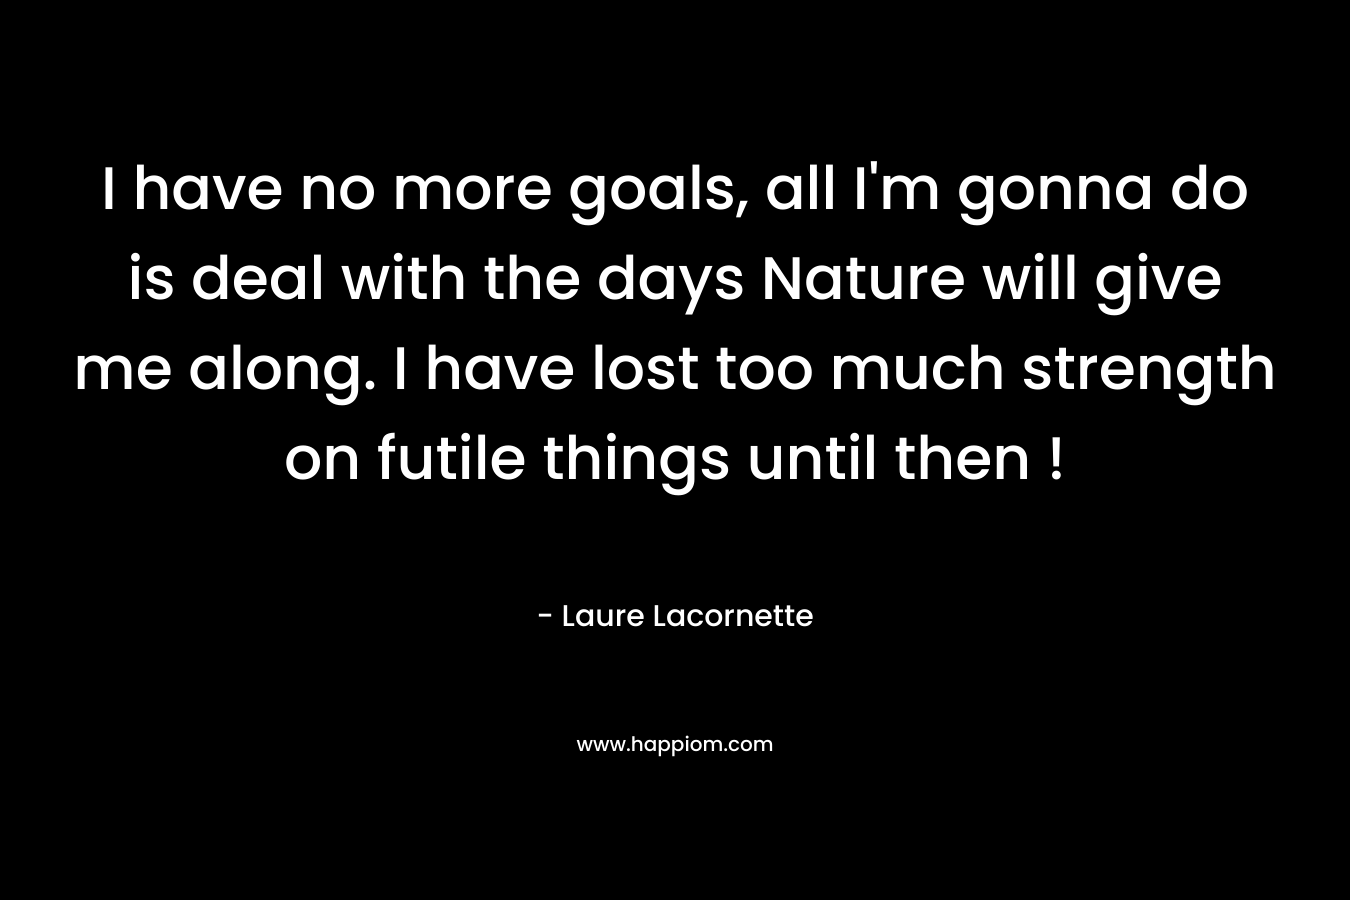 I have no more goals, all I'm gonna do is deal with the days Nature will give me along. I have lost too much strength on futile things until then !